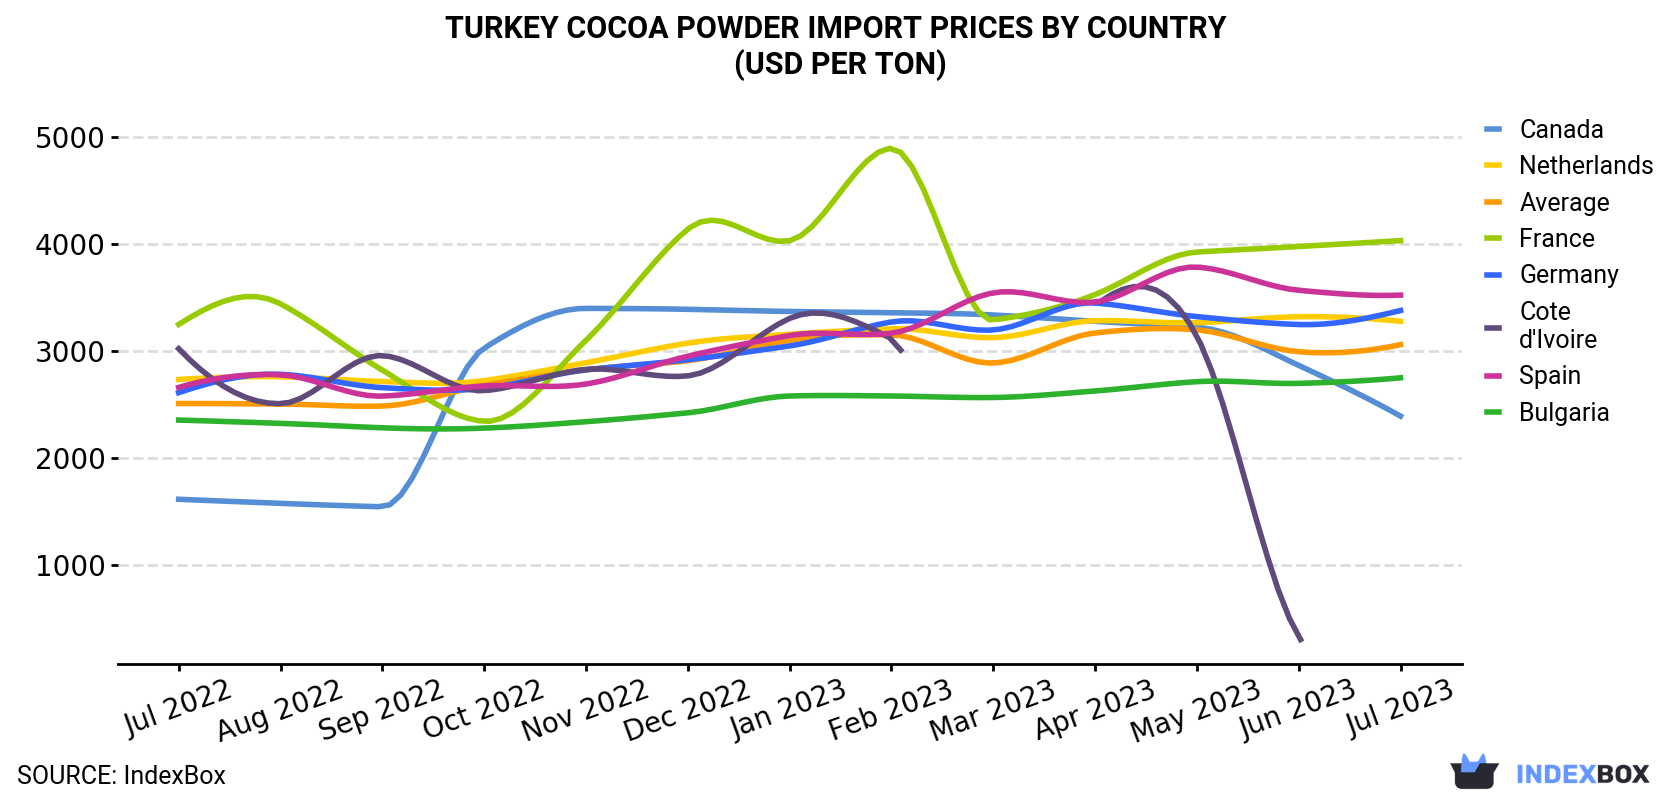 Turkey Cocoa Powder Import Prices By Country (USD Per Ton)